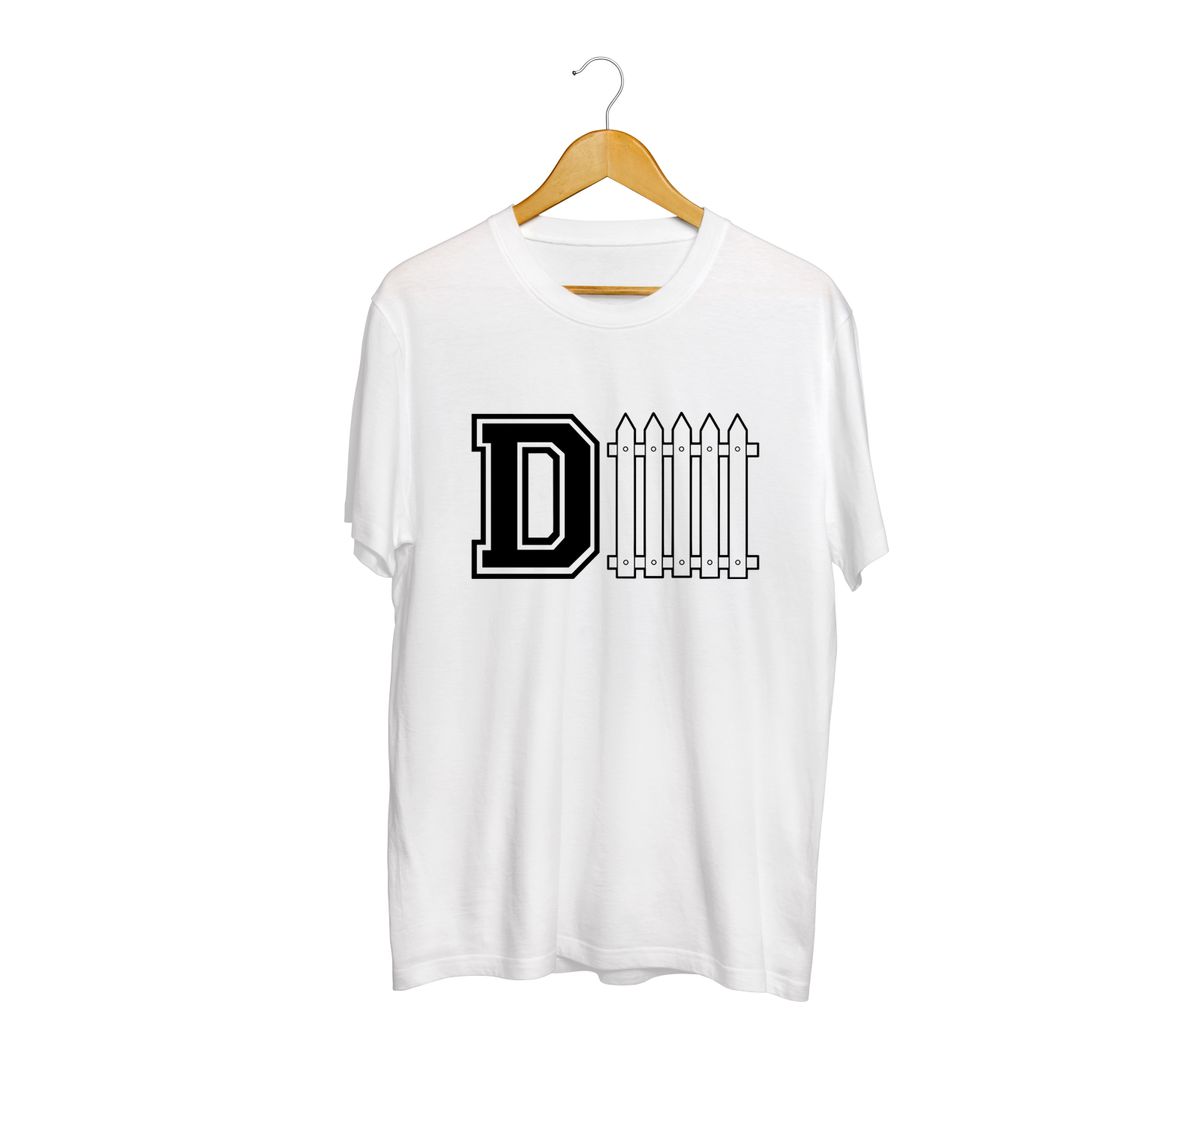 Fan Made Fits Football White DFence T-Shirt image 1